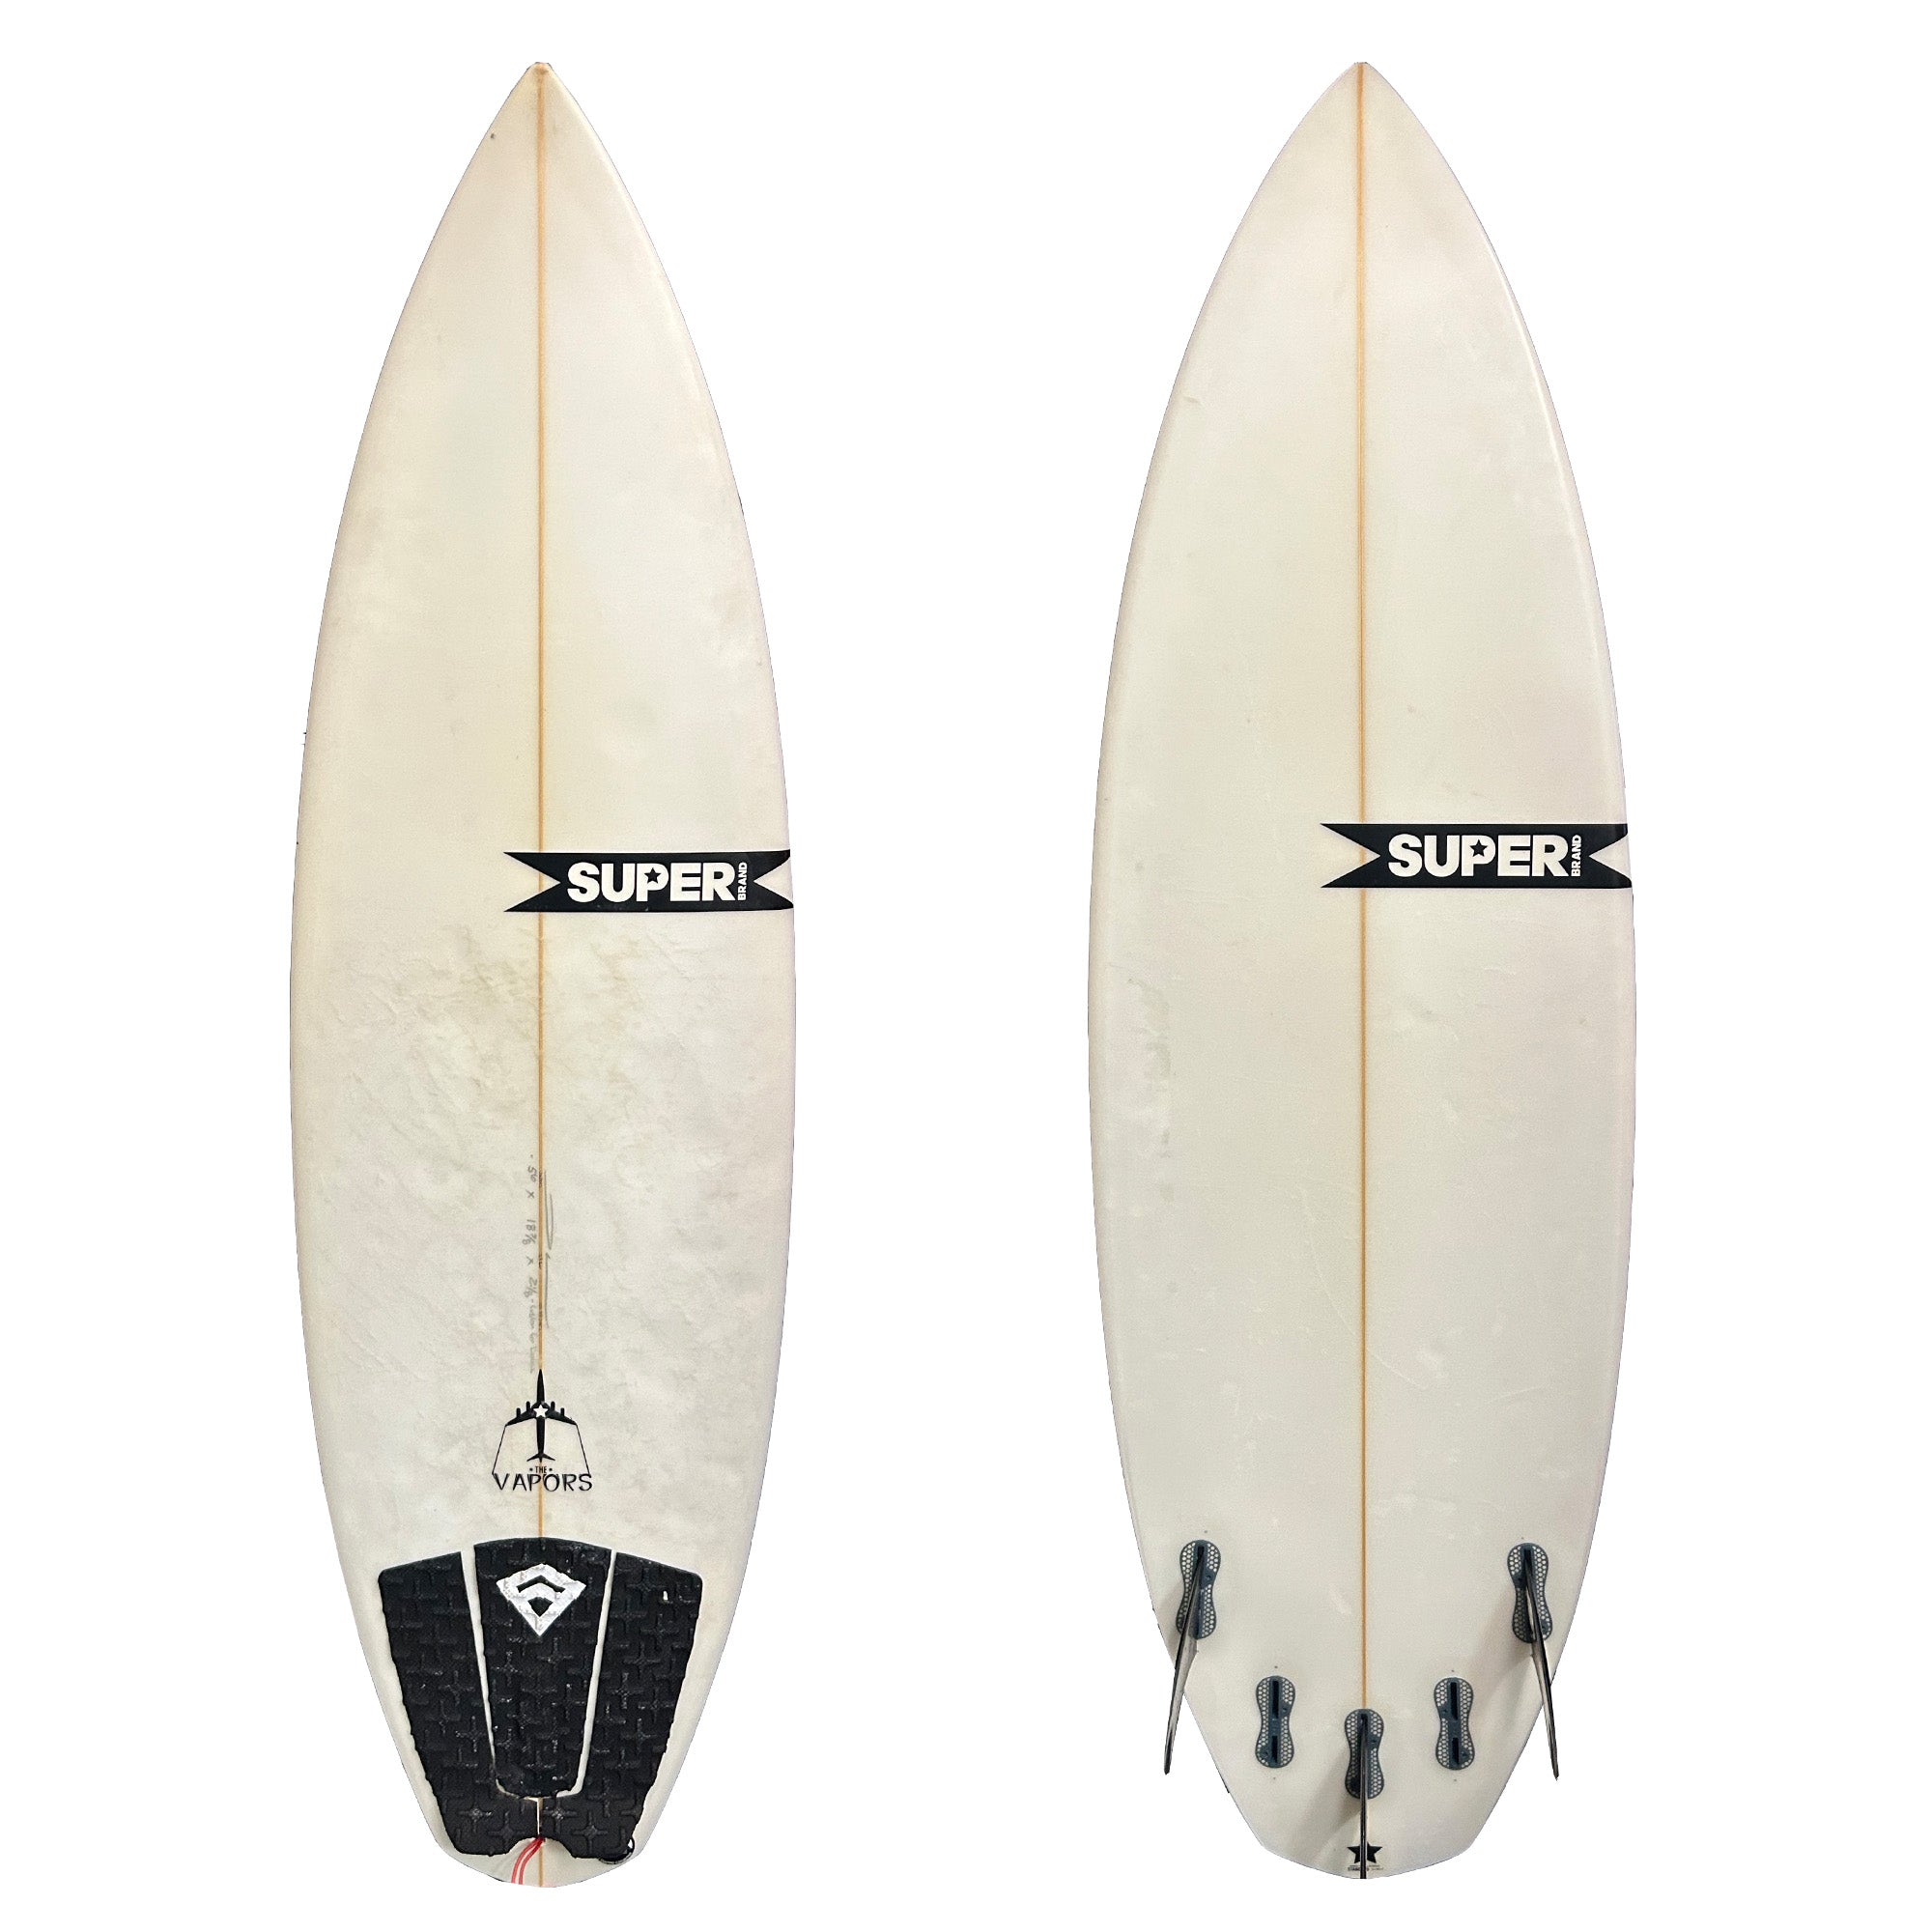 Super Brand The Vapors 5'6 Consignment Surfboard